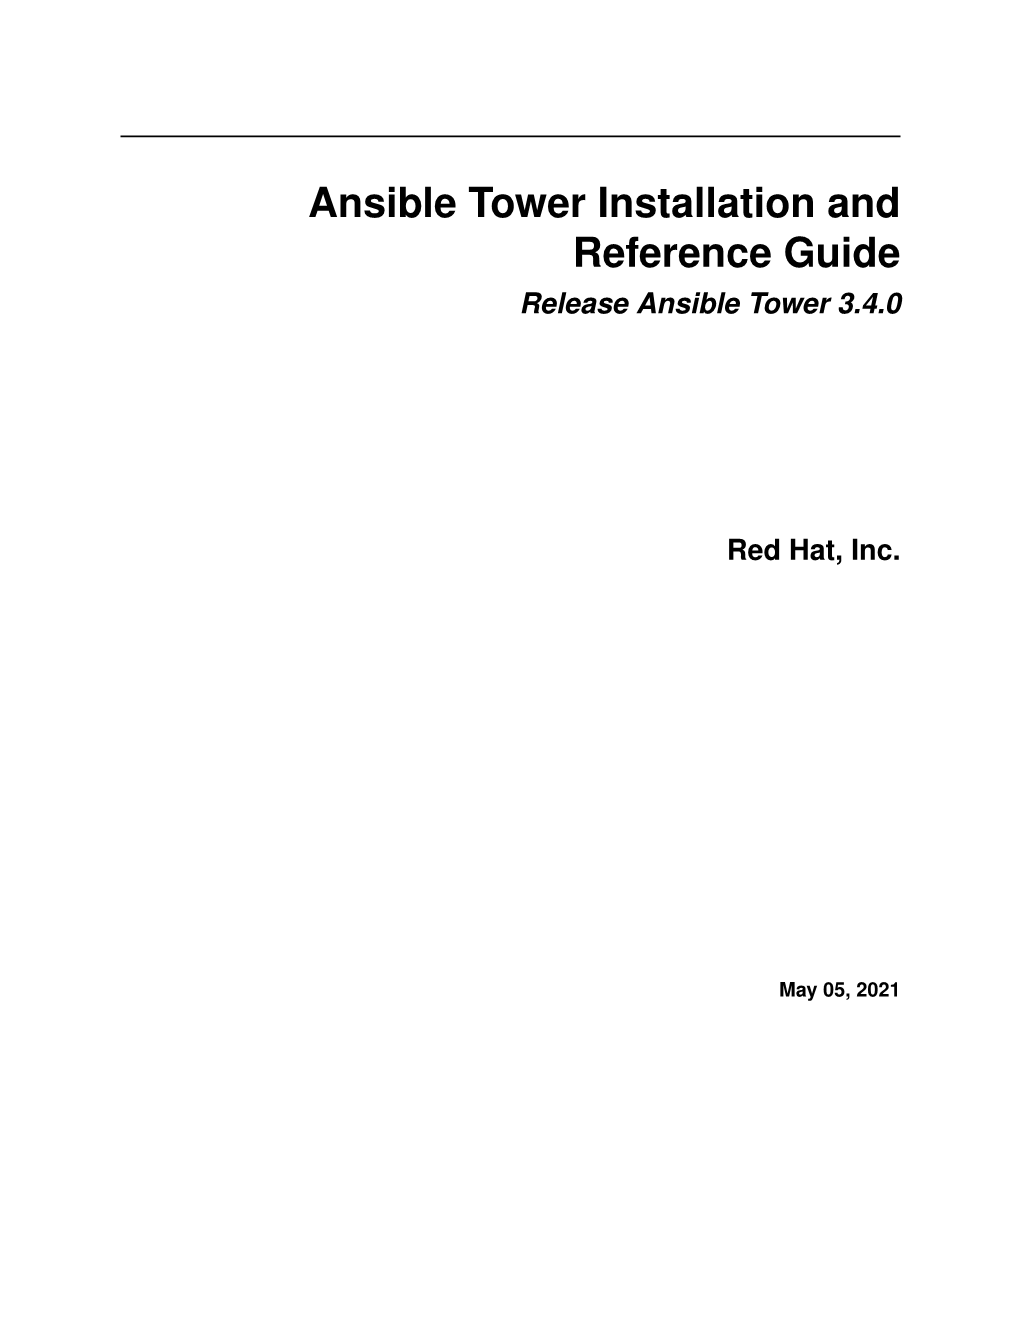 Ansible Tower Installation and Reference Guide Release Ansible Tower 3.4.0